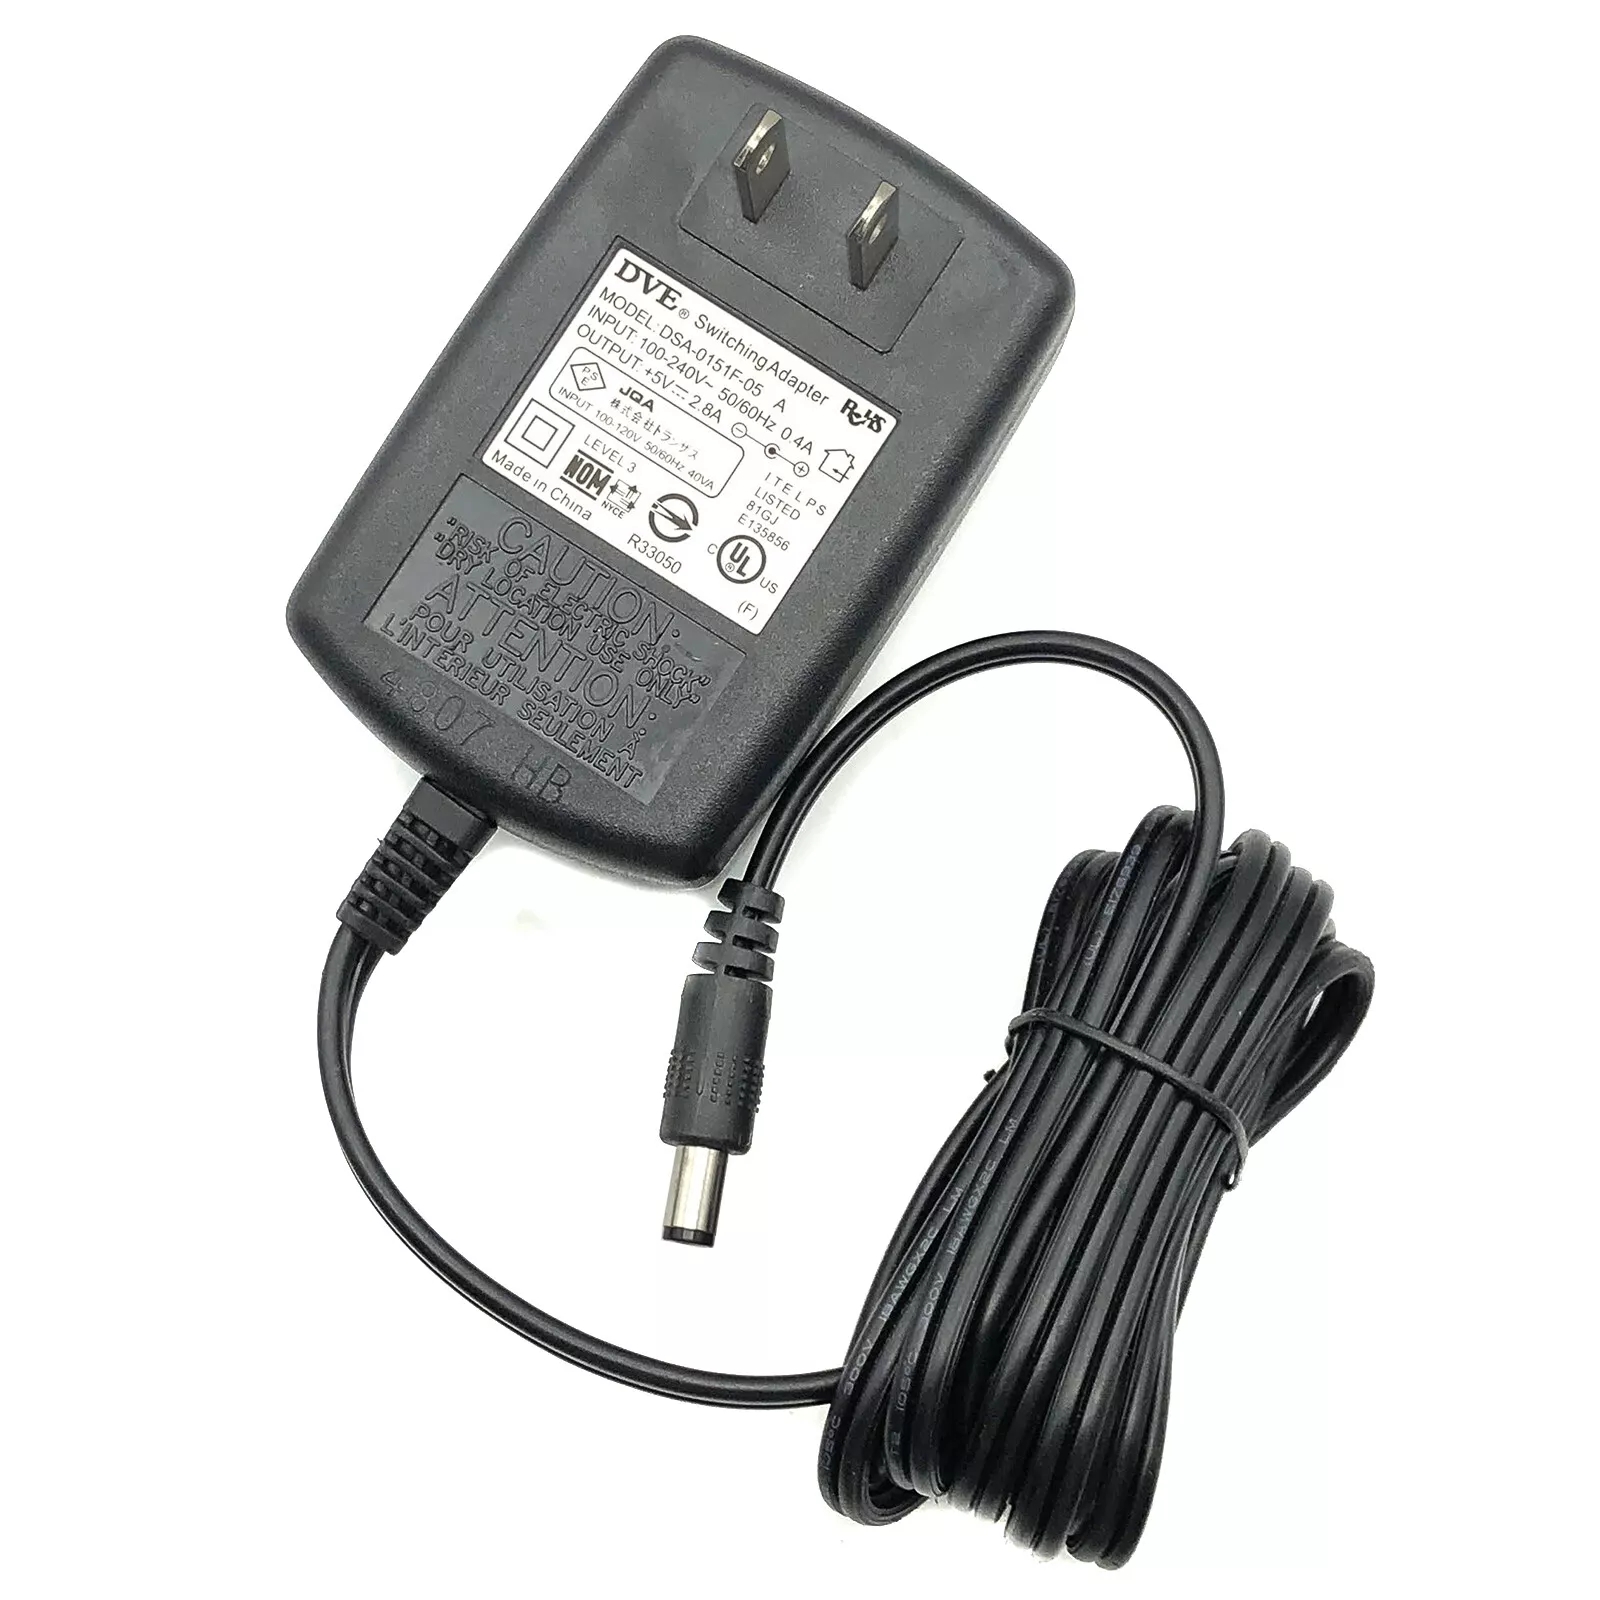 *Brand NEW*Genuine 5V 2.8A 14W DVE AC DC Wall Switching Adapter Model: DSA-0151F-05 A Power Supply